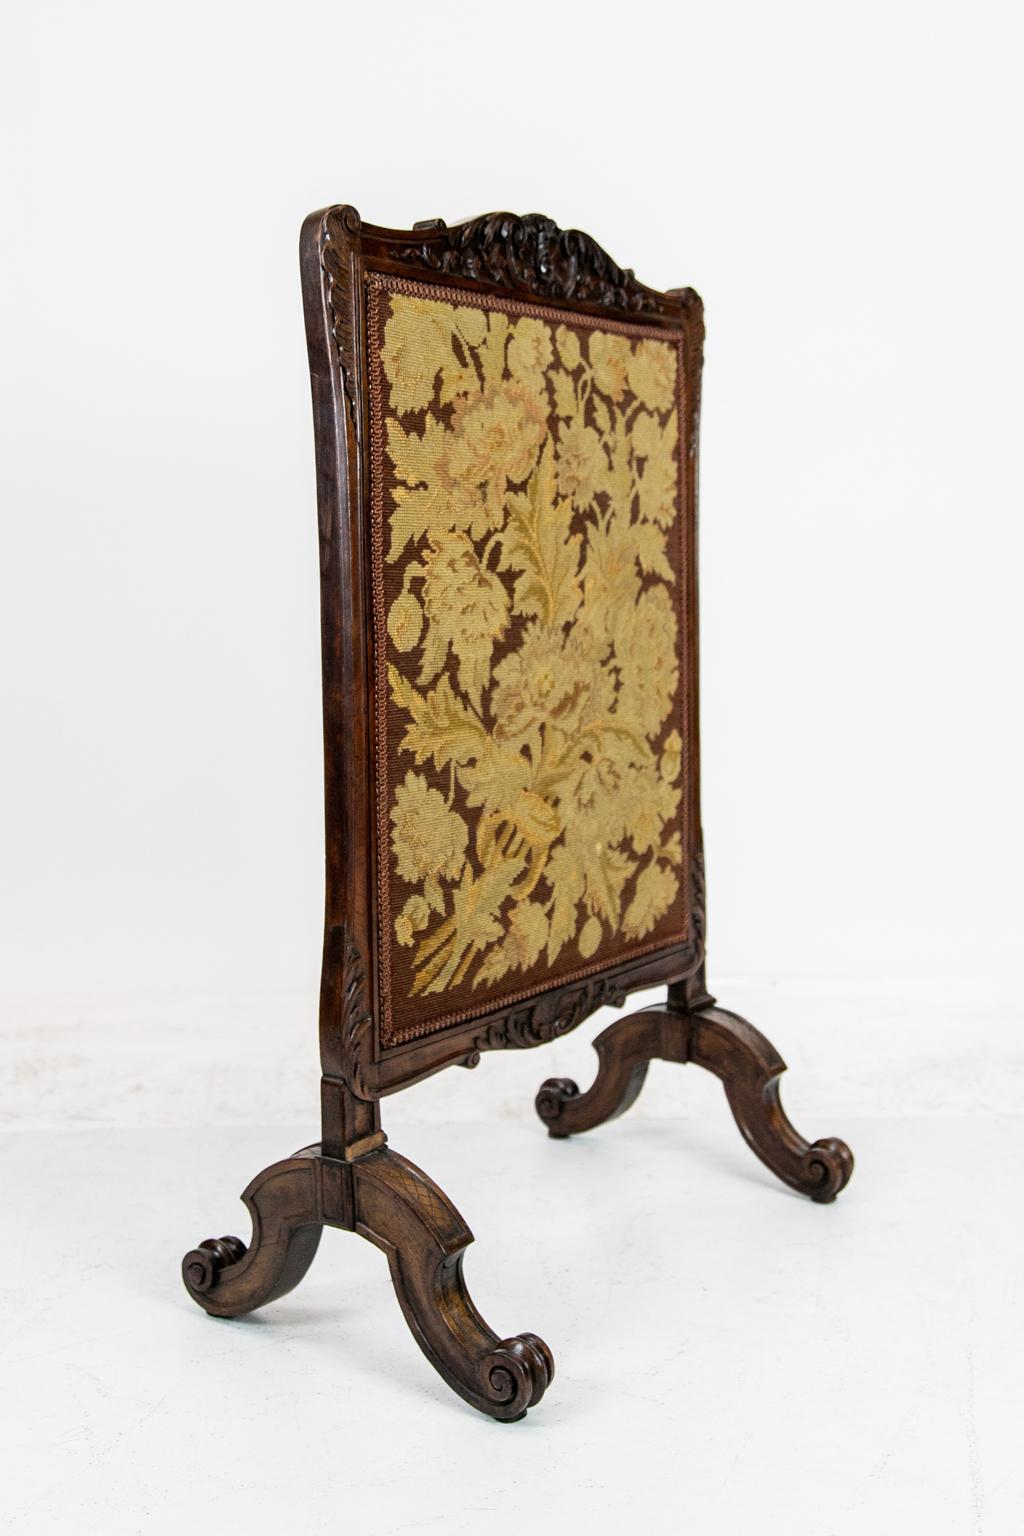 Carved Walnut English Foliate Needlepoint Firescreen In Good Condition For Sale In Wilson, NC